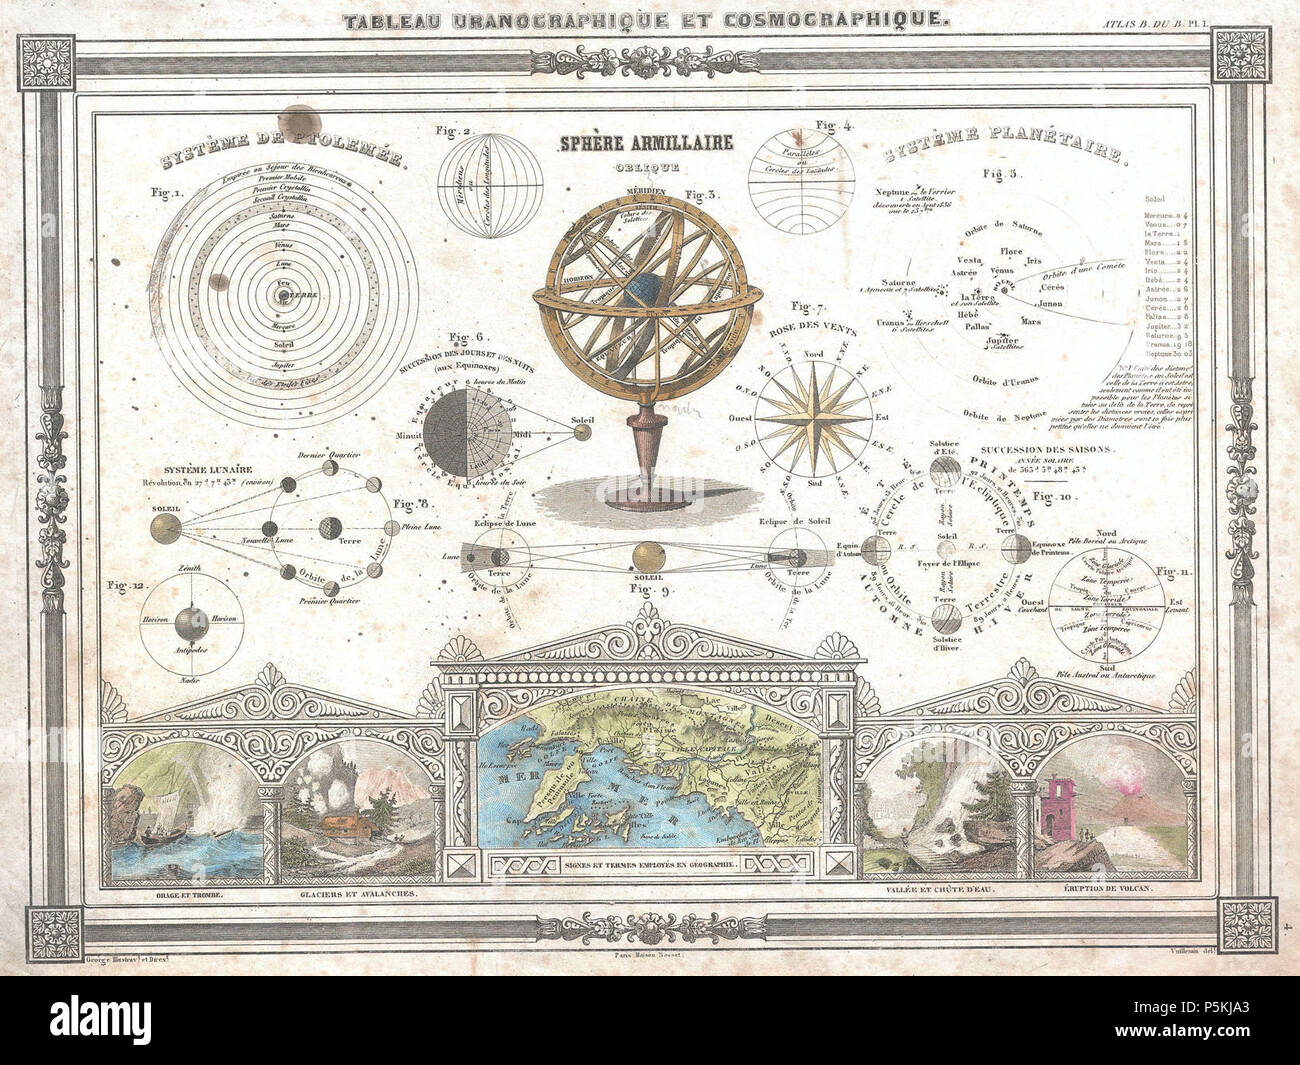 1852 Vuillemin Astronomical and Cosmographical Chart - Geographicus - Cosmographique-vuillemin-1852. Stock Photo